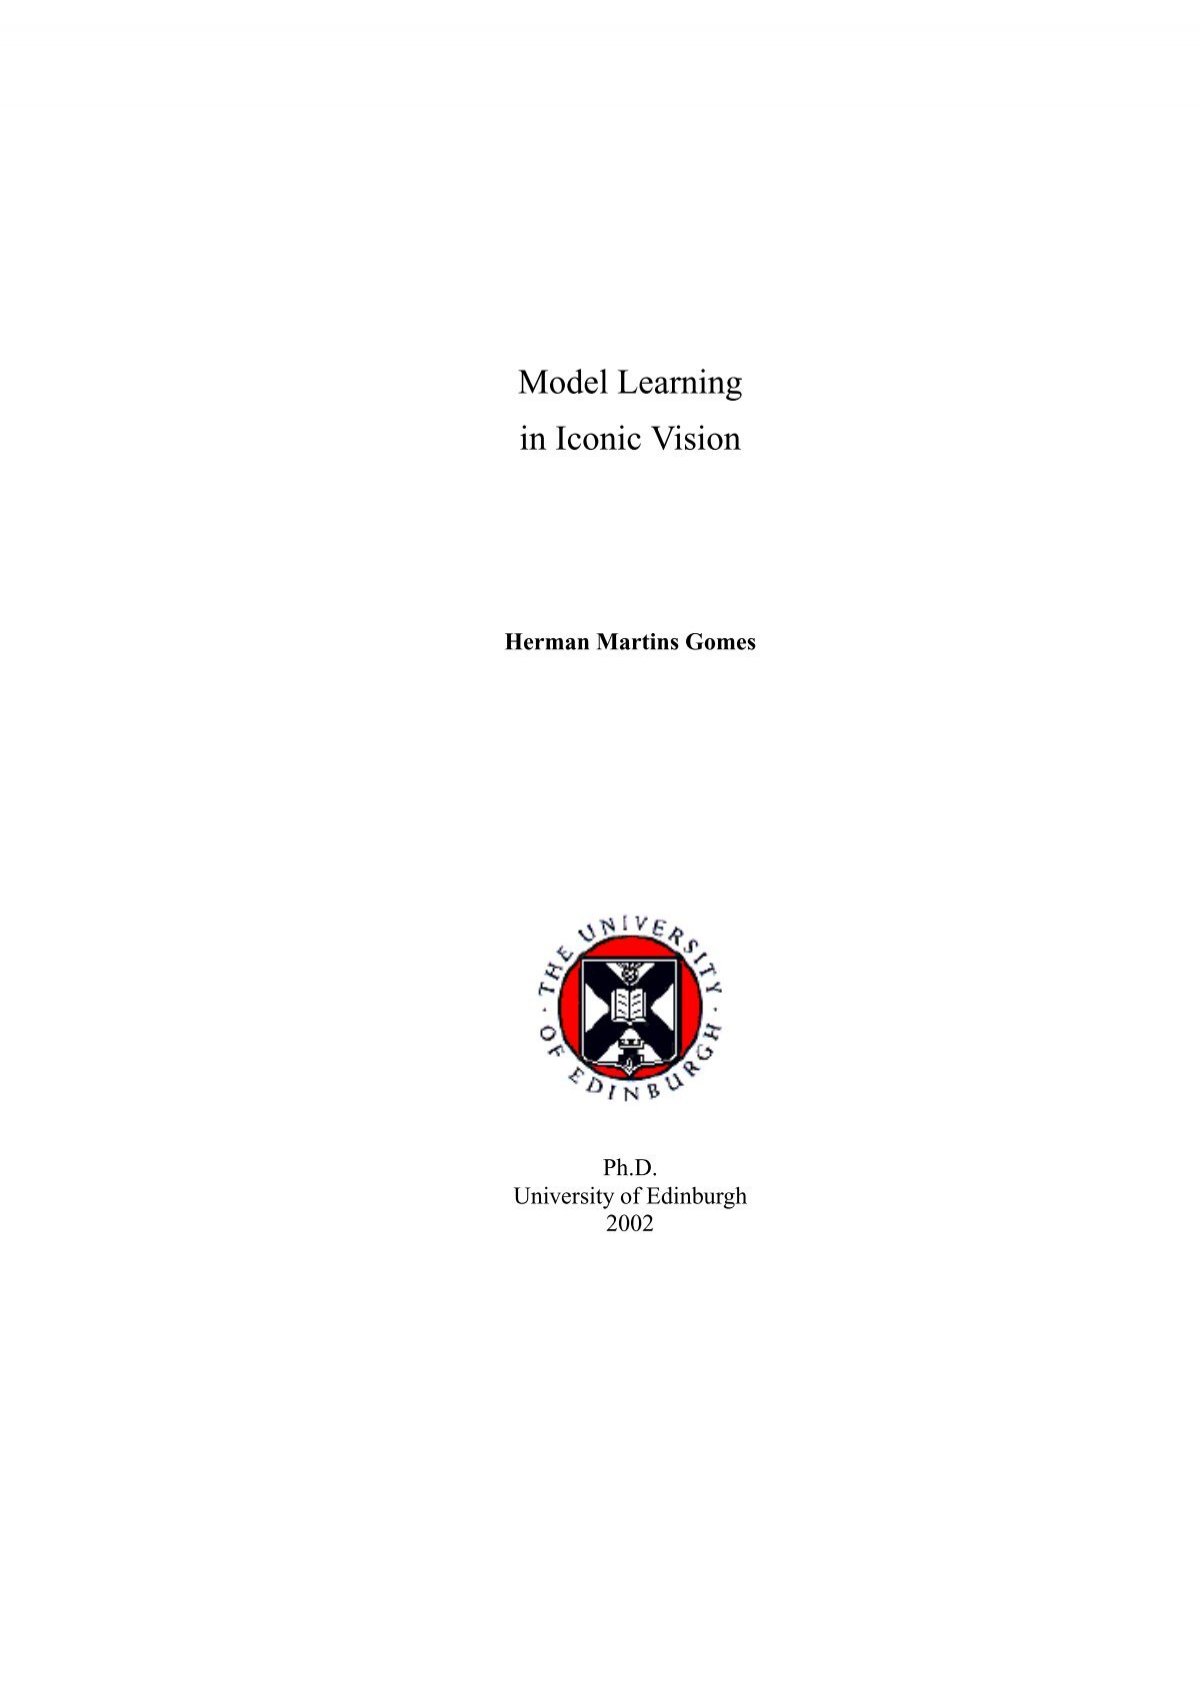 Phd Thesis Model Learning In Iconic Vision University Of Edinburgh